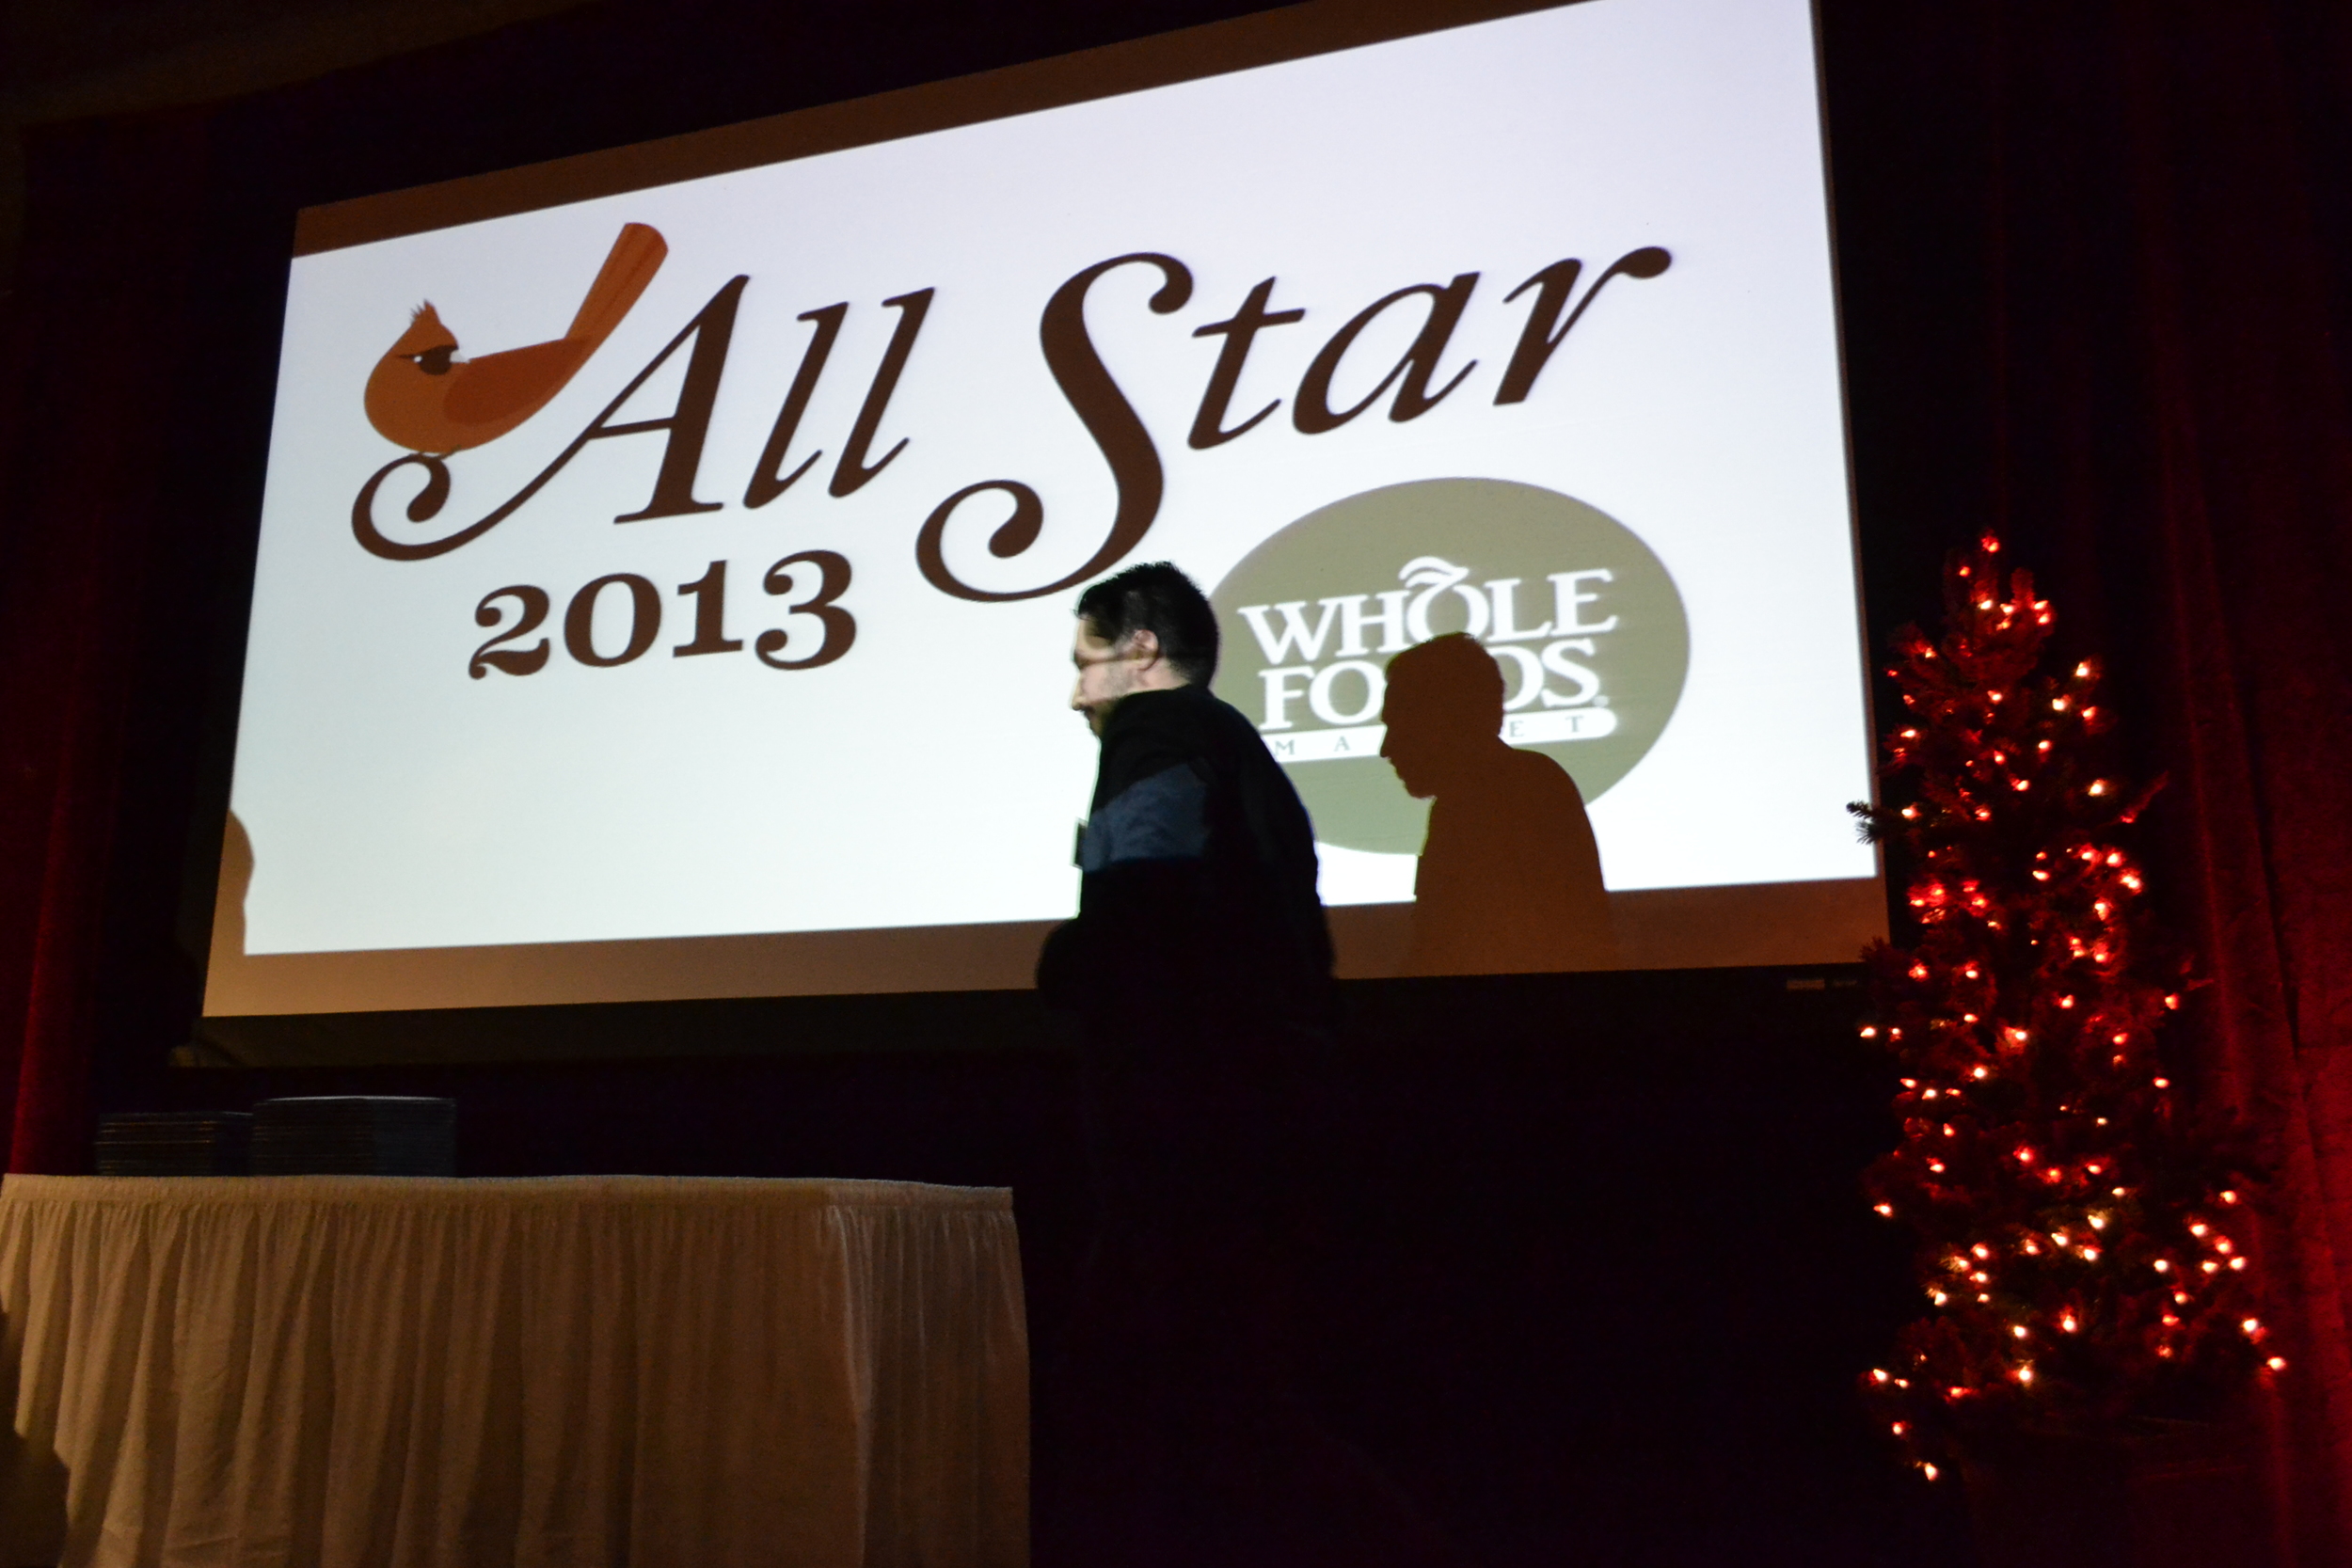 All Star Event 2013